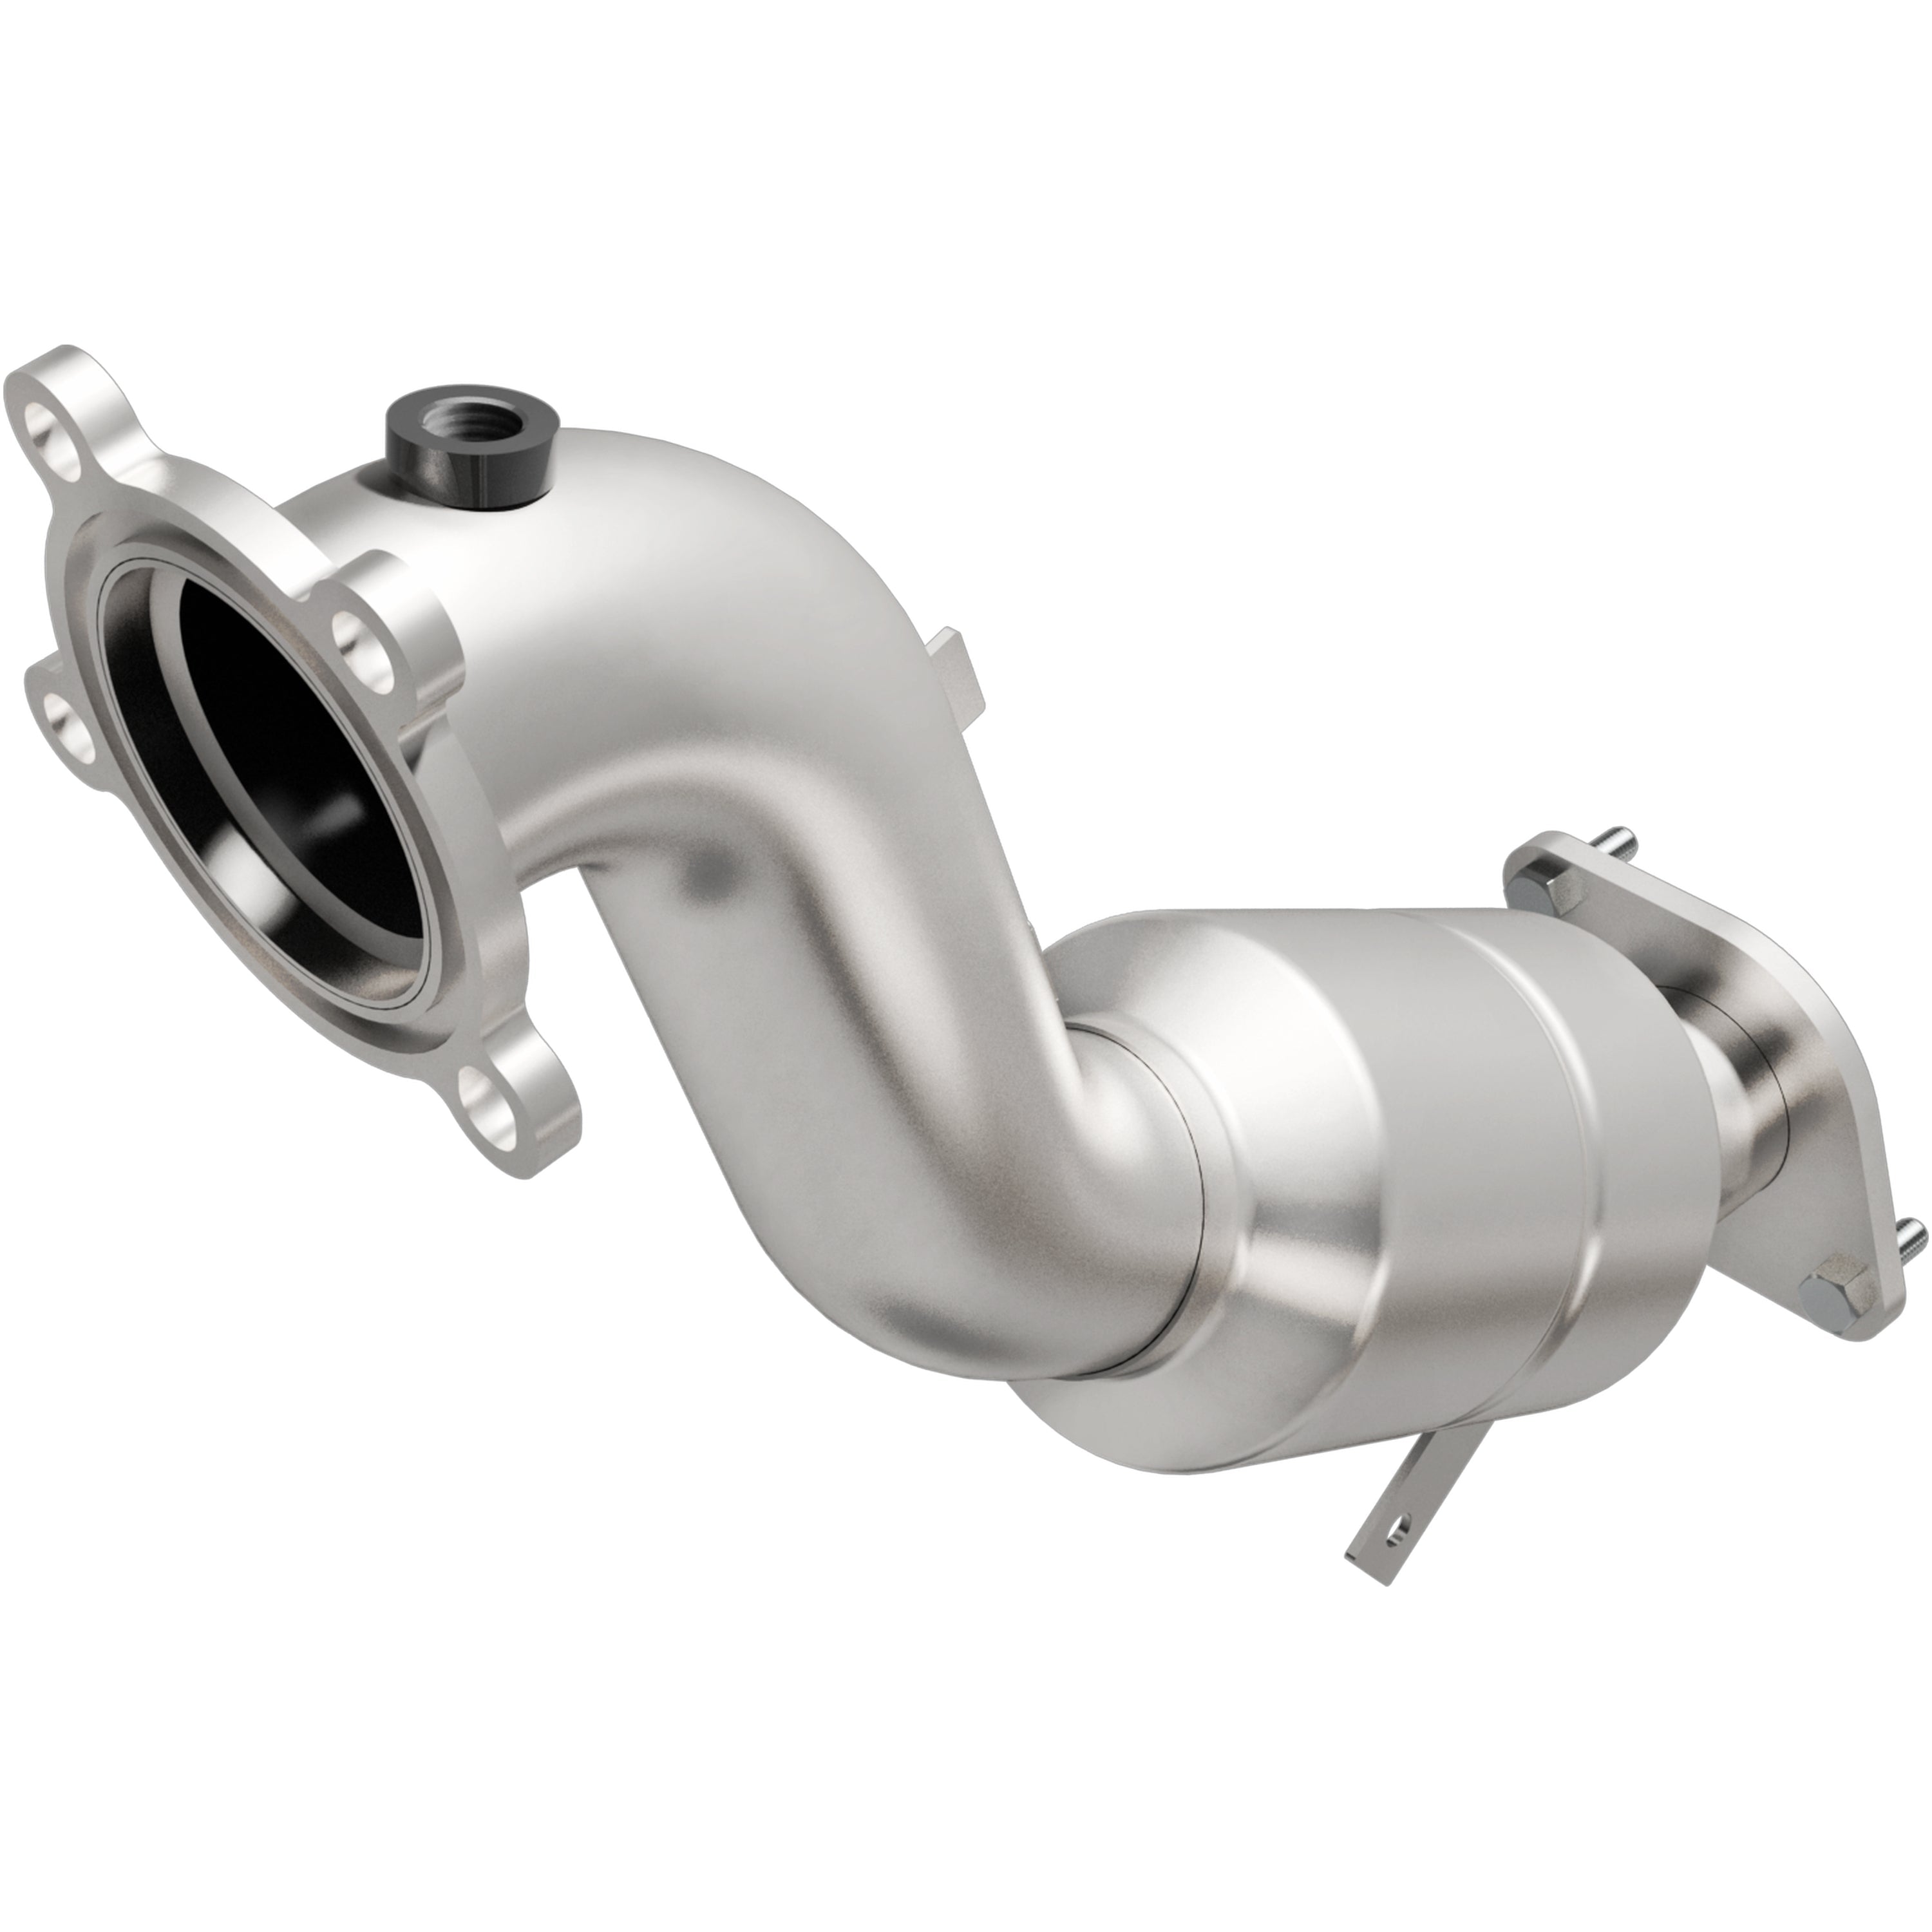 OEM Grade Federal / EPA Compliant Direct-Fit Catalytic Converter <br>13-15 Cadillac ATS, 14-15 CTS 2.0L